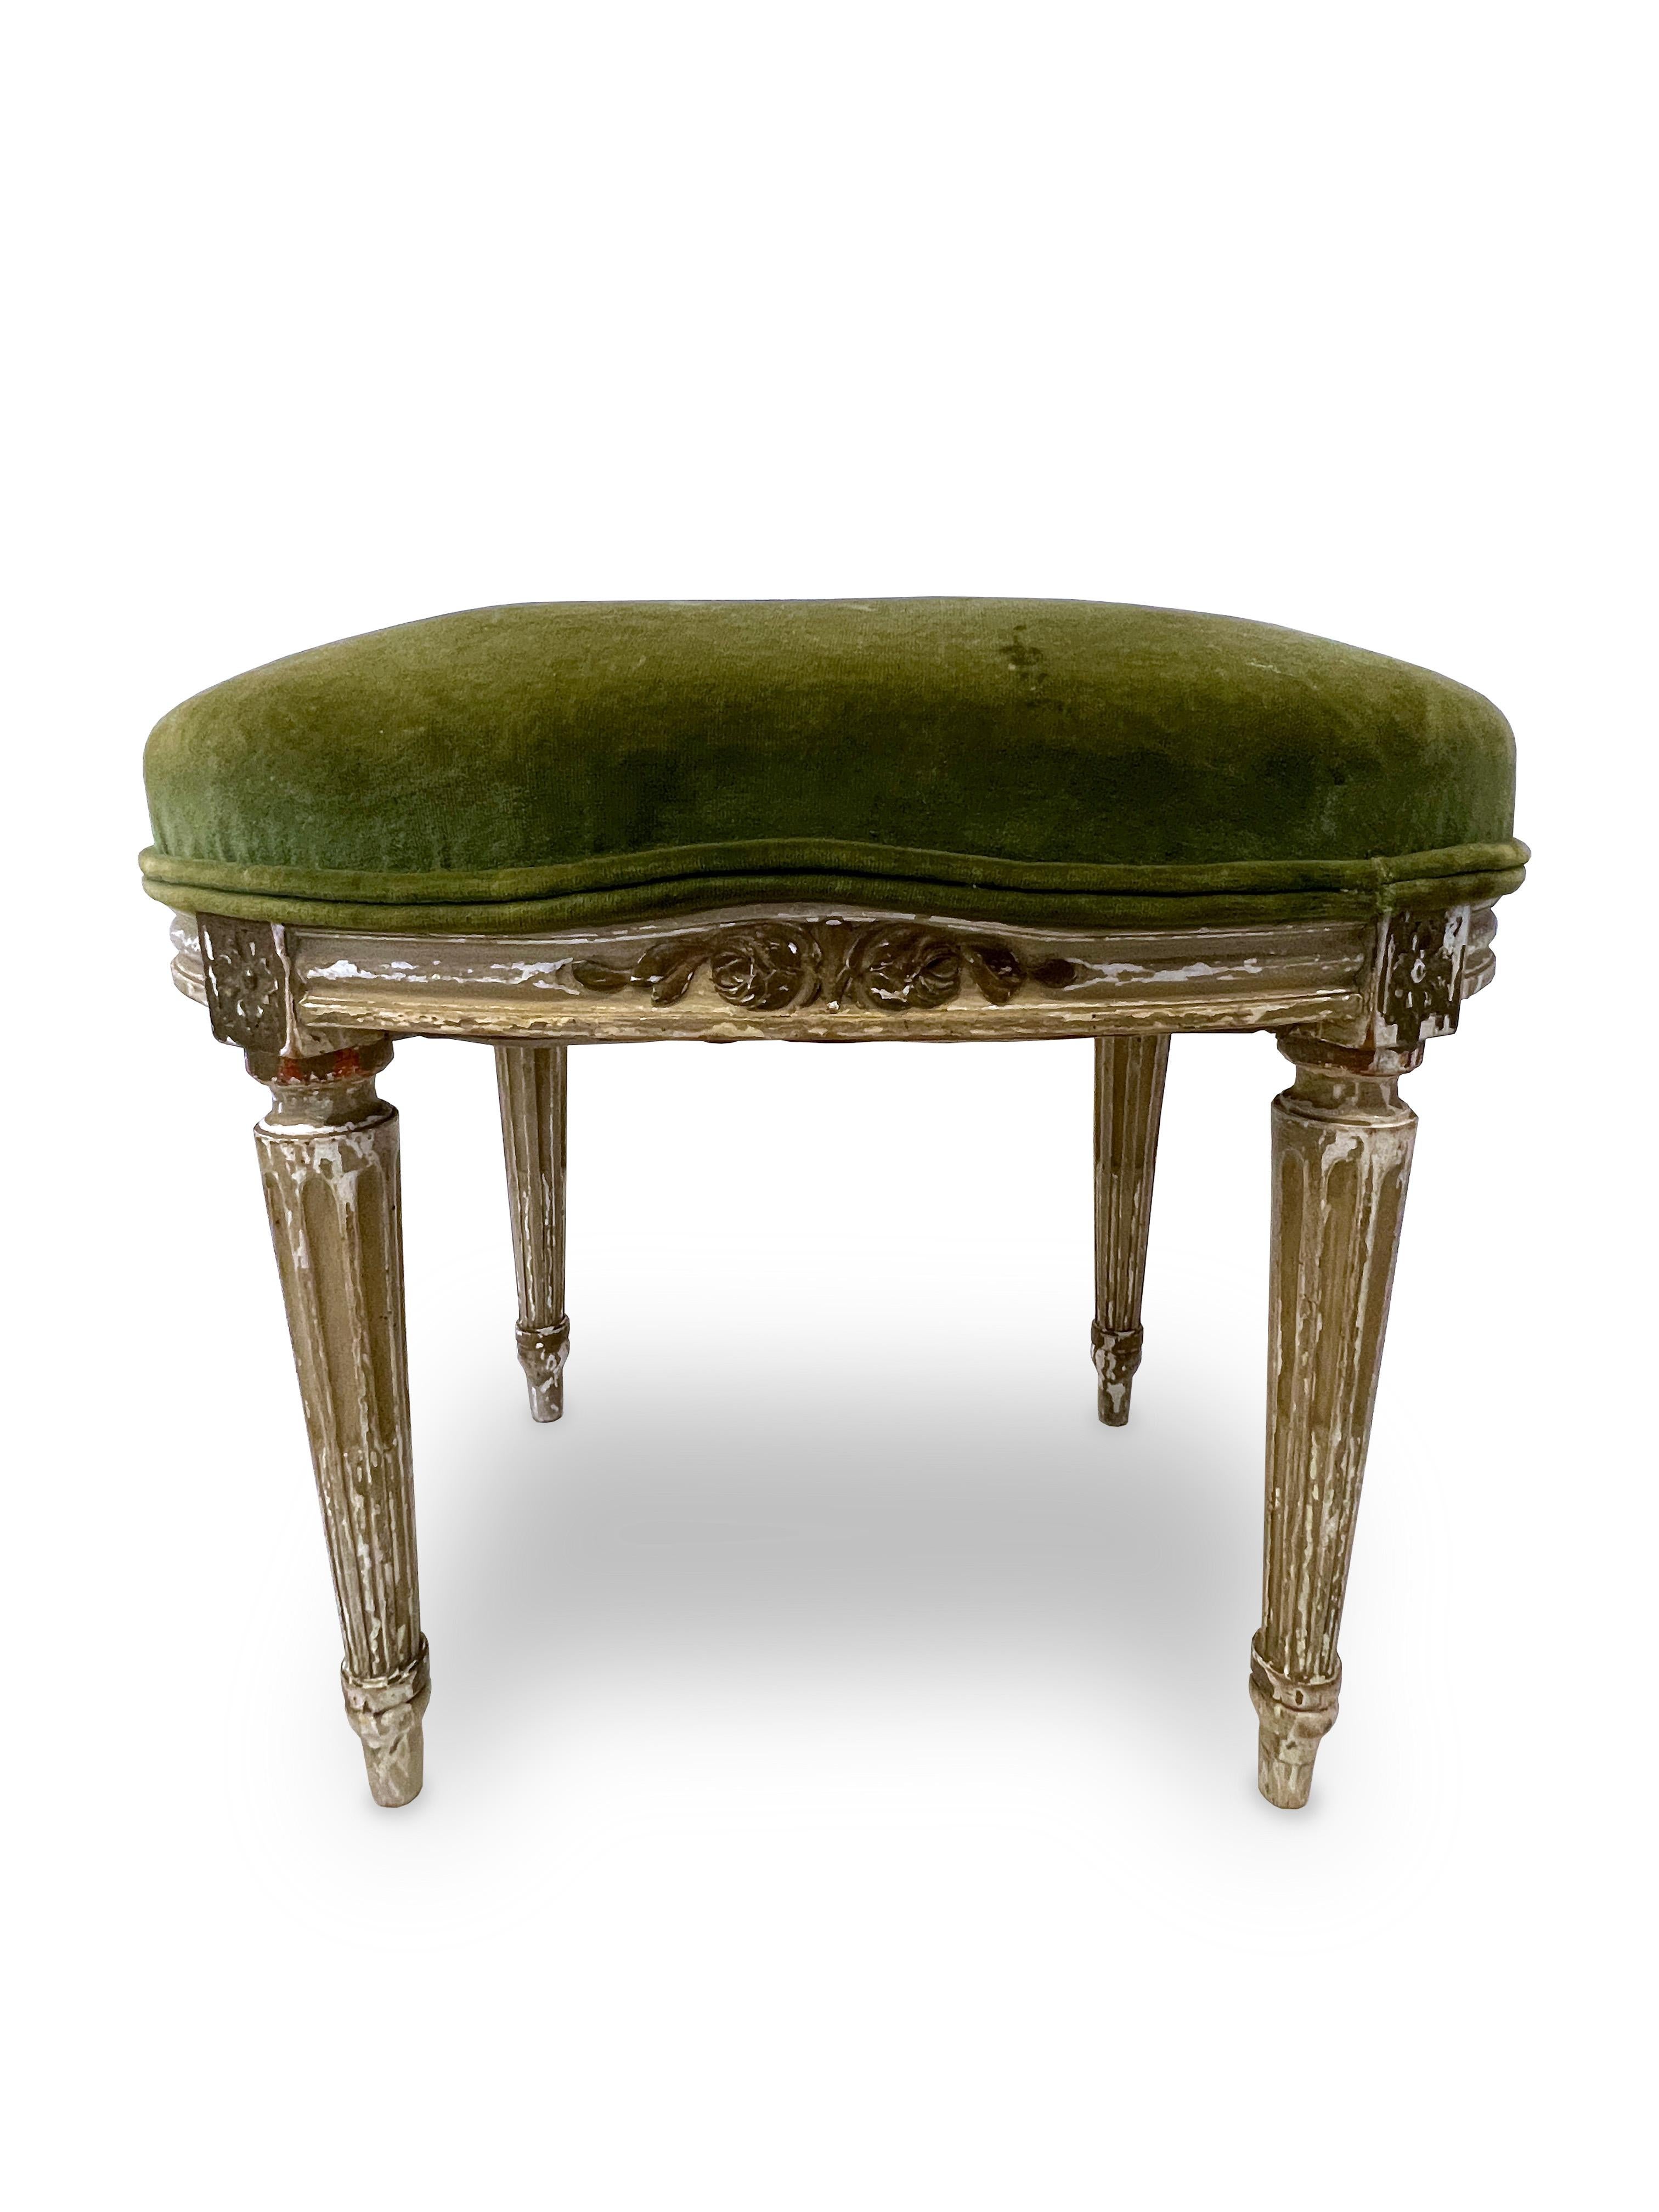 French Louis XVI Style Painted Stool with Olive Velvet Upholstery 1